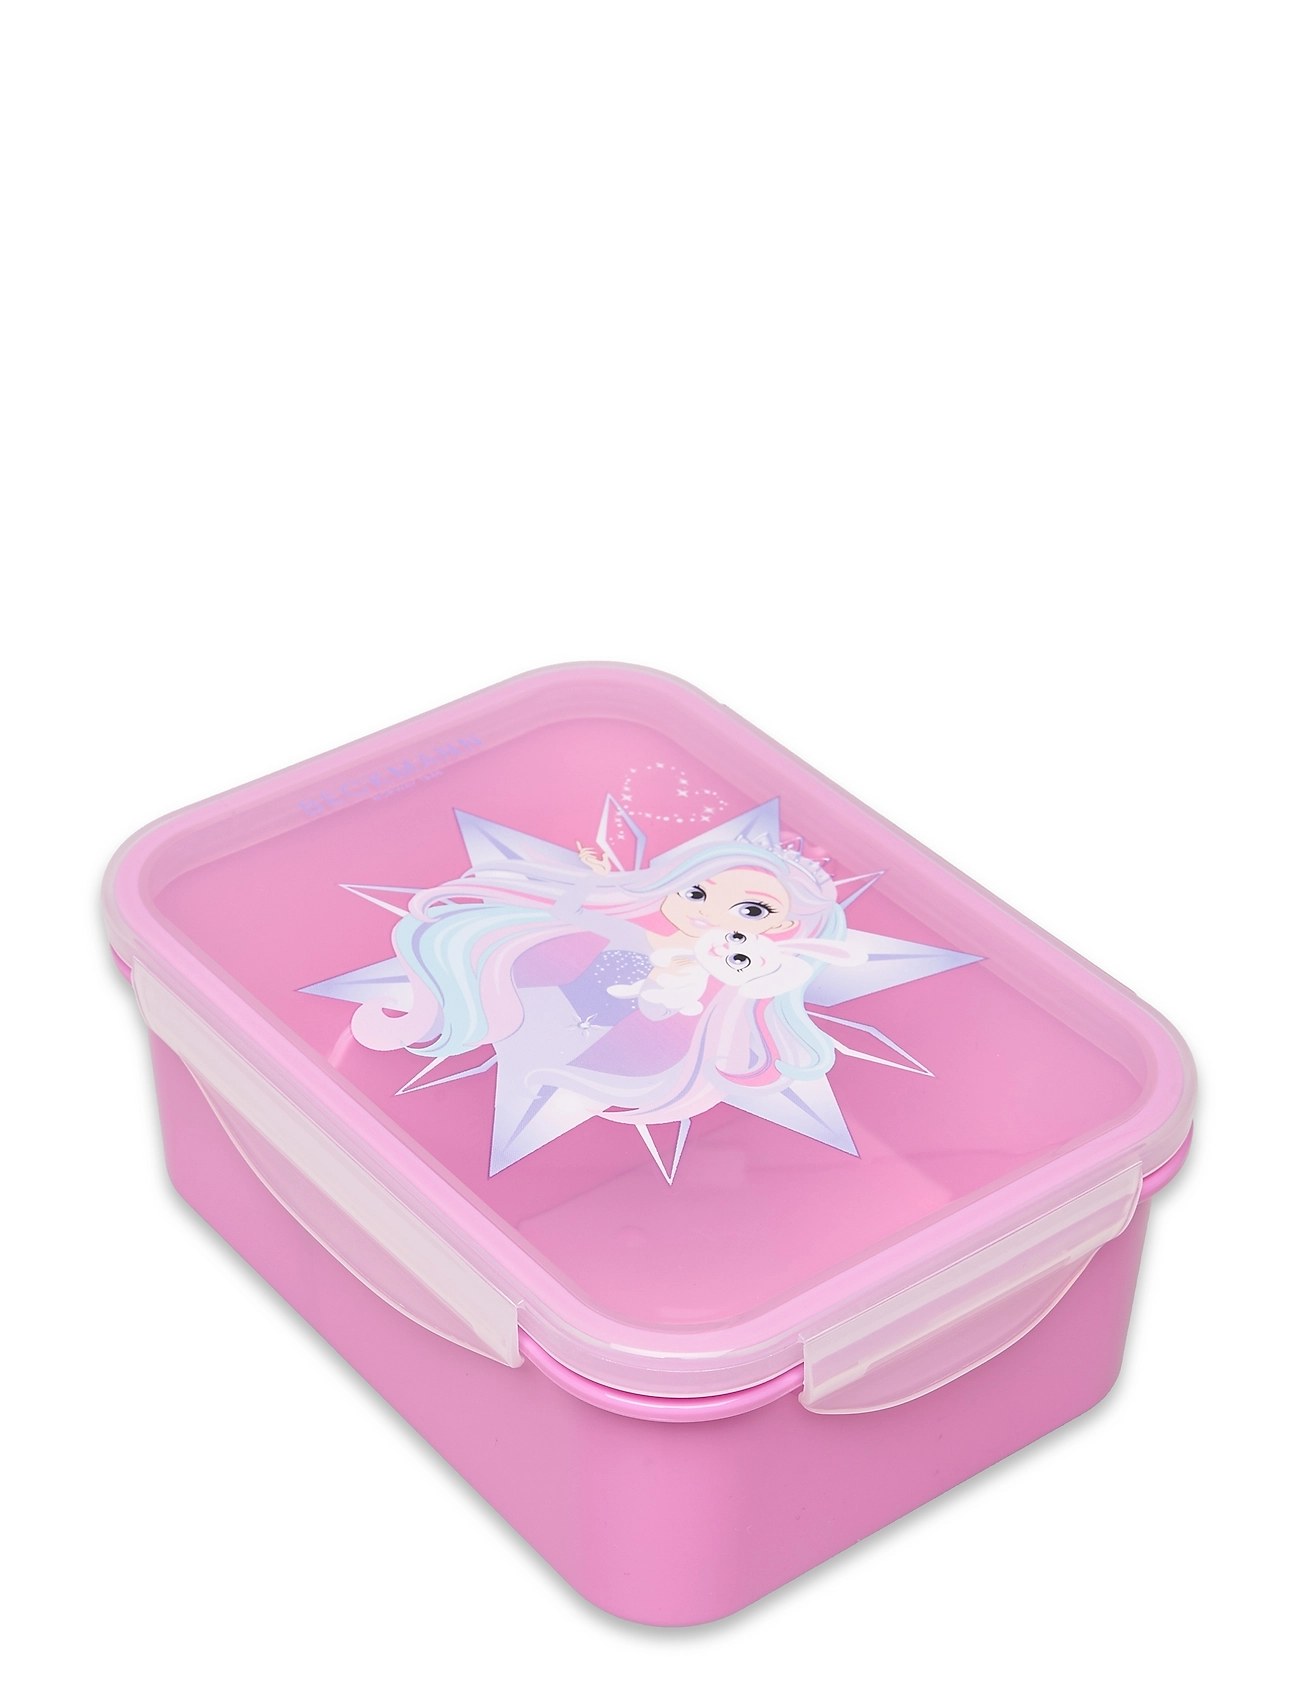 Lunch Box - Star Princess Home Meal Time Lunch Boxes Pink Beckmann Of Norway